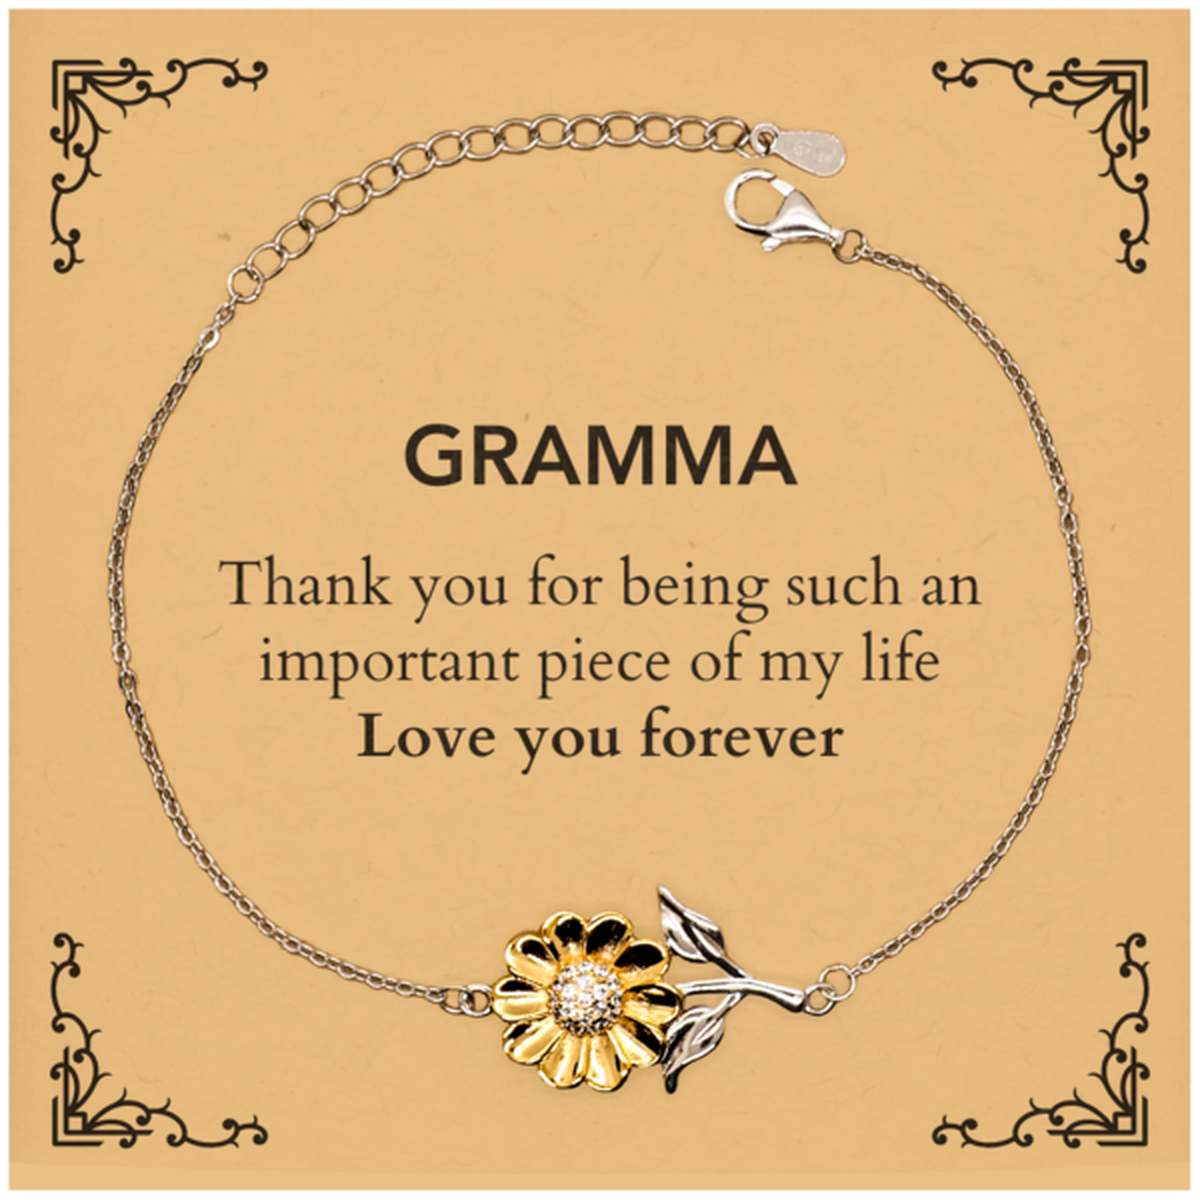 Appropriate Gramma Sunflower Bracelet Epic Birthday Gifts for Gramma Thank you for being such an important piece of my life Gramma Christmas Mothers Fathers Day